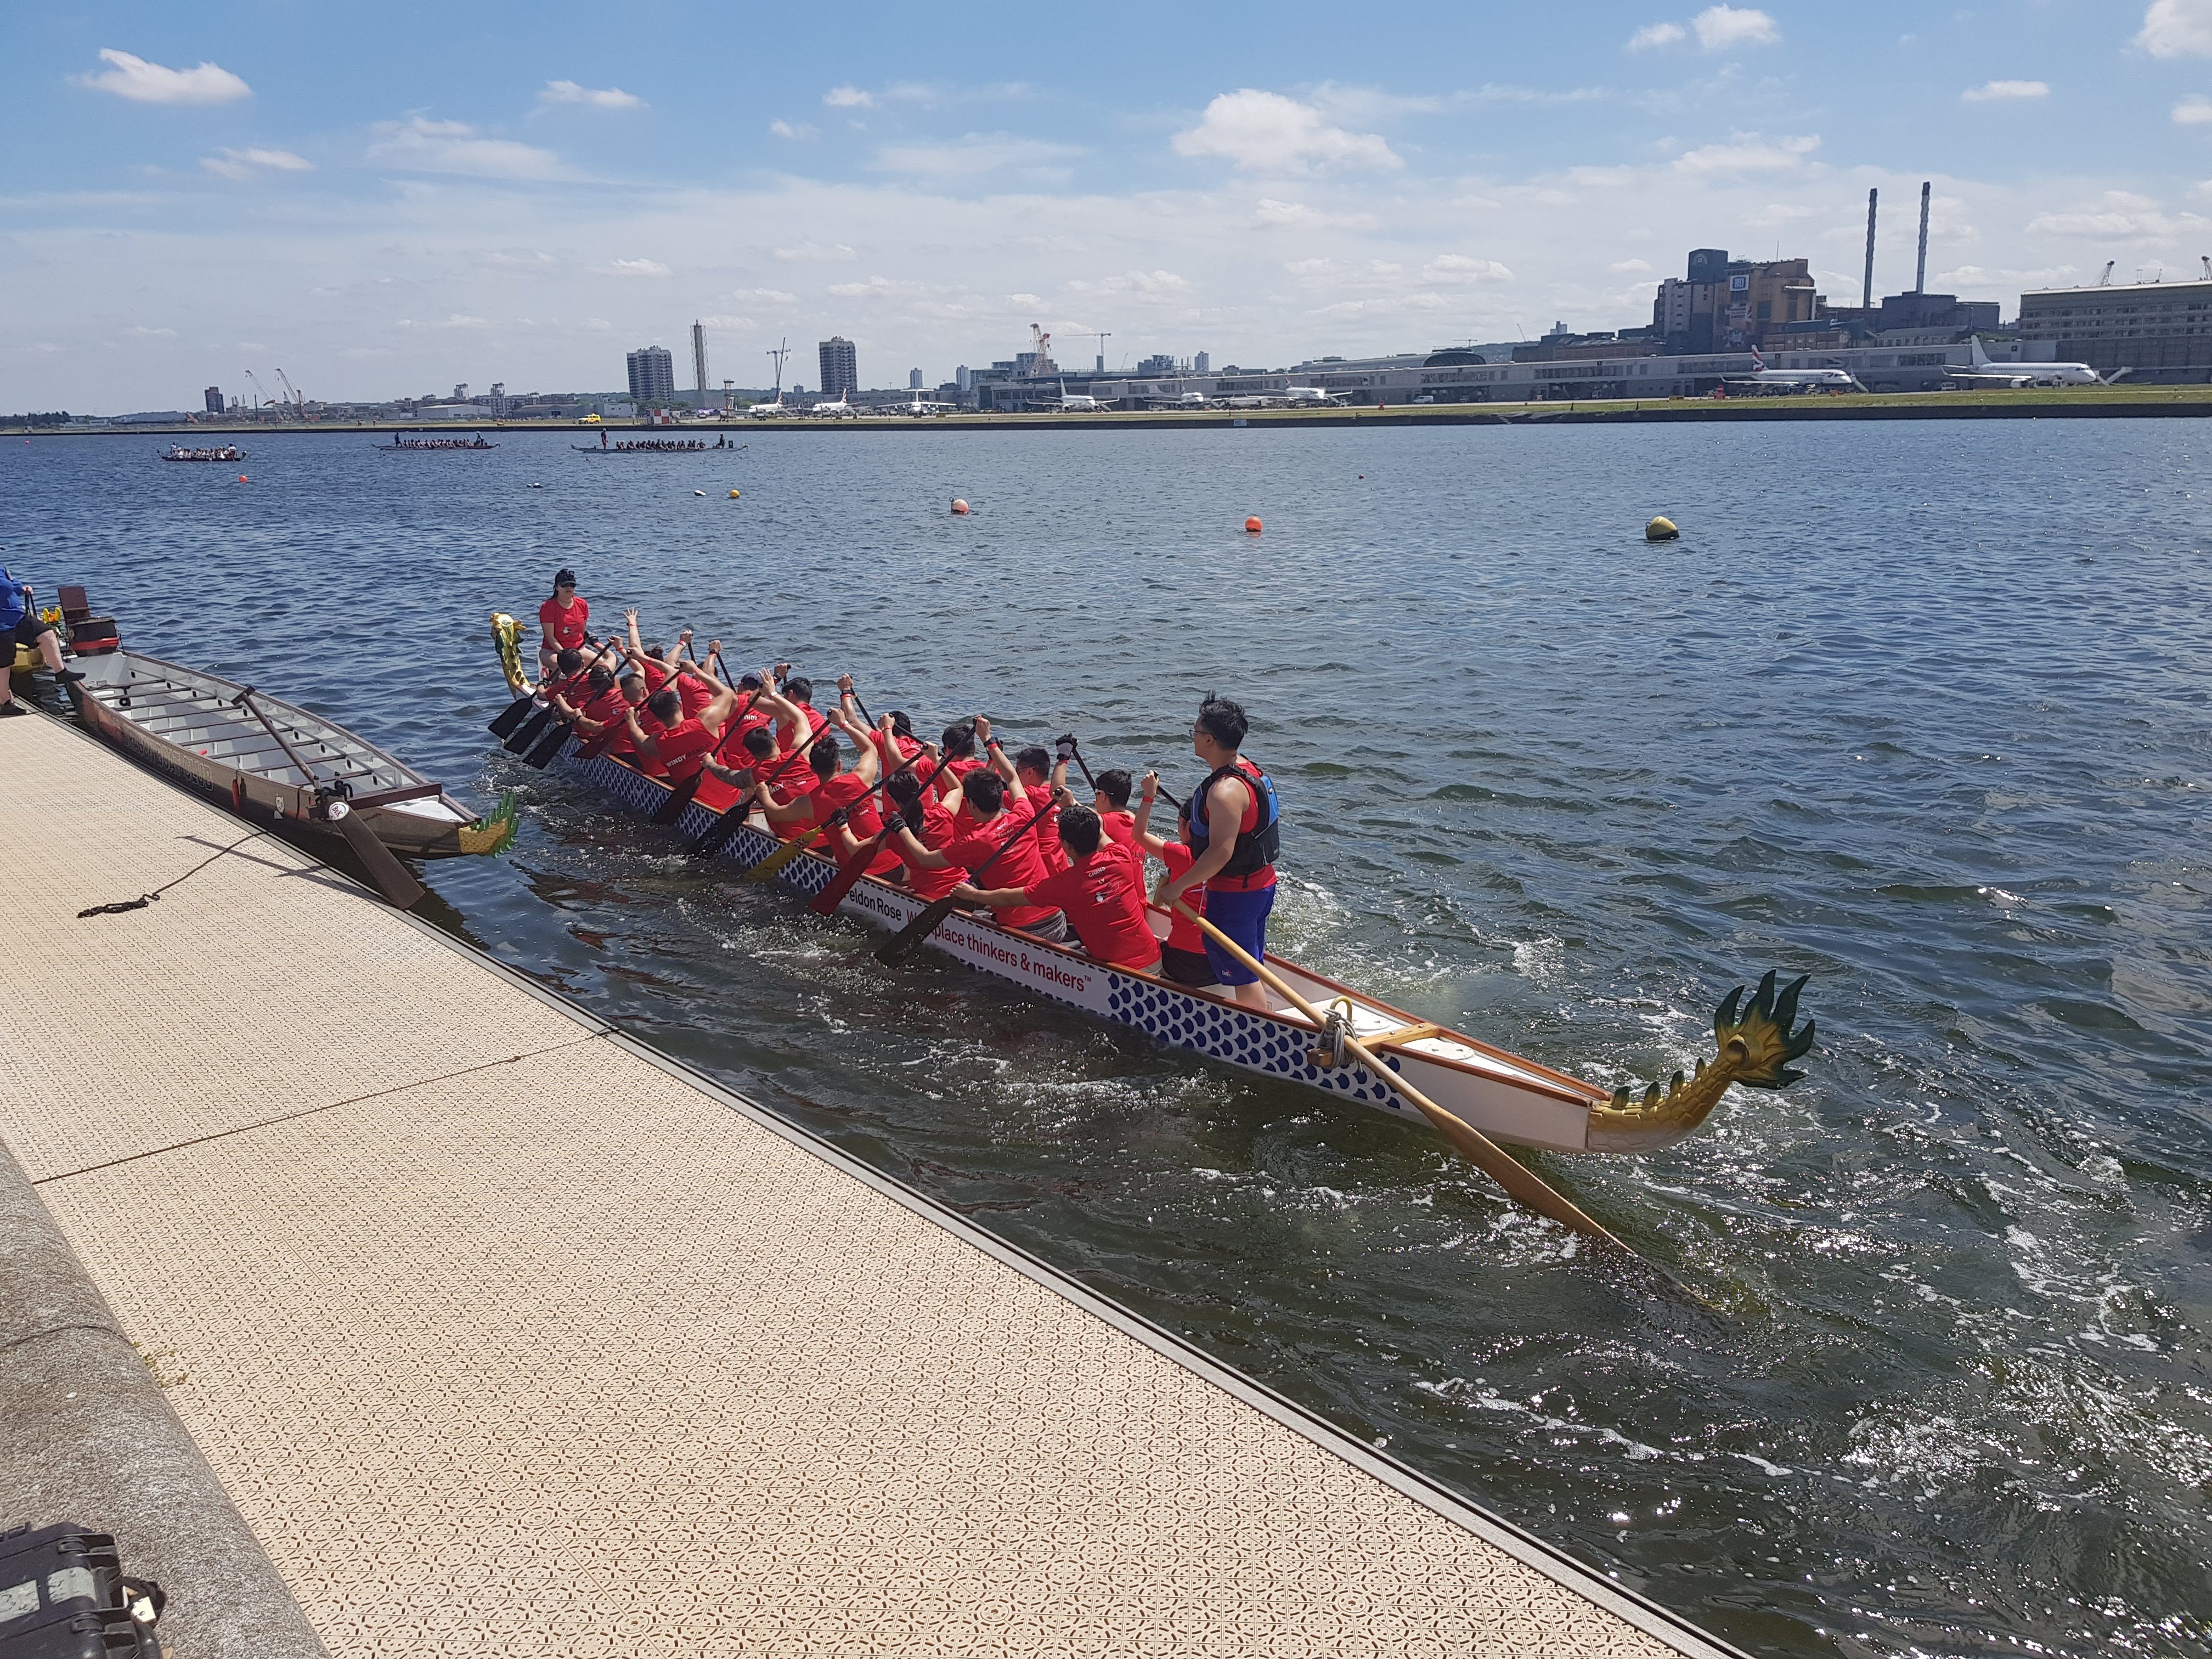 The Windy Pandas team on the water in the Royal Docks